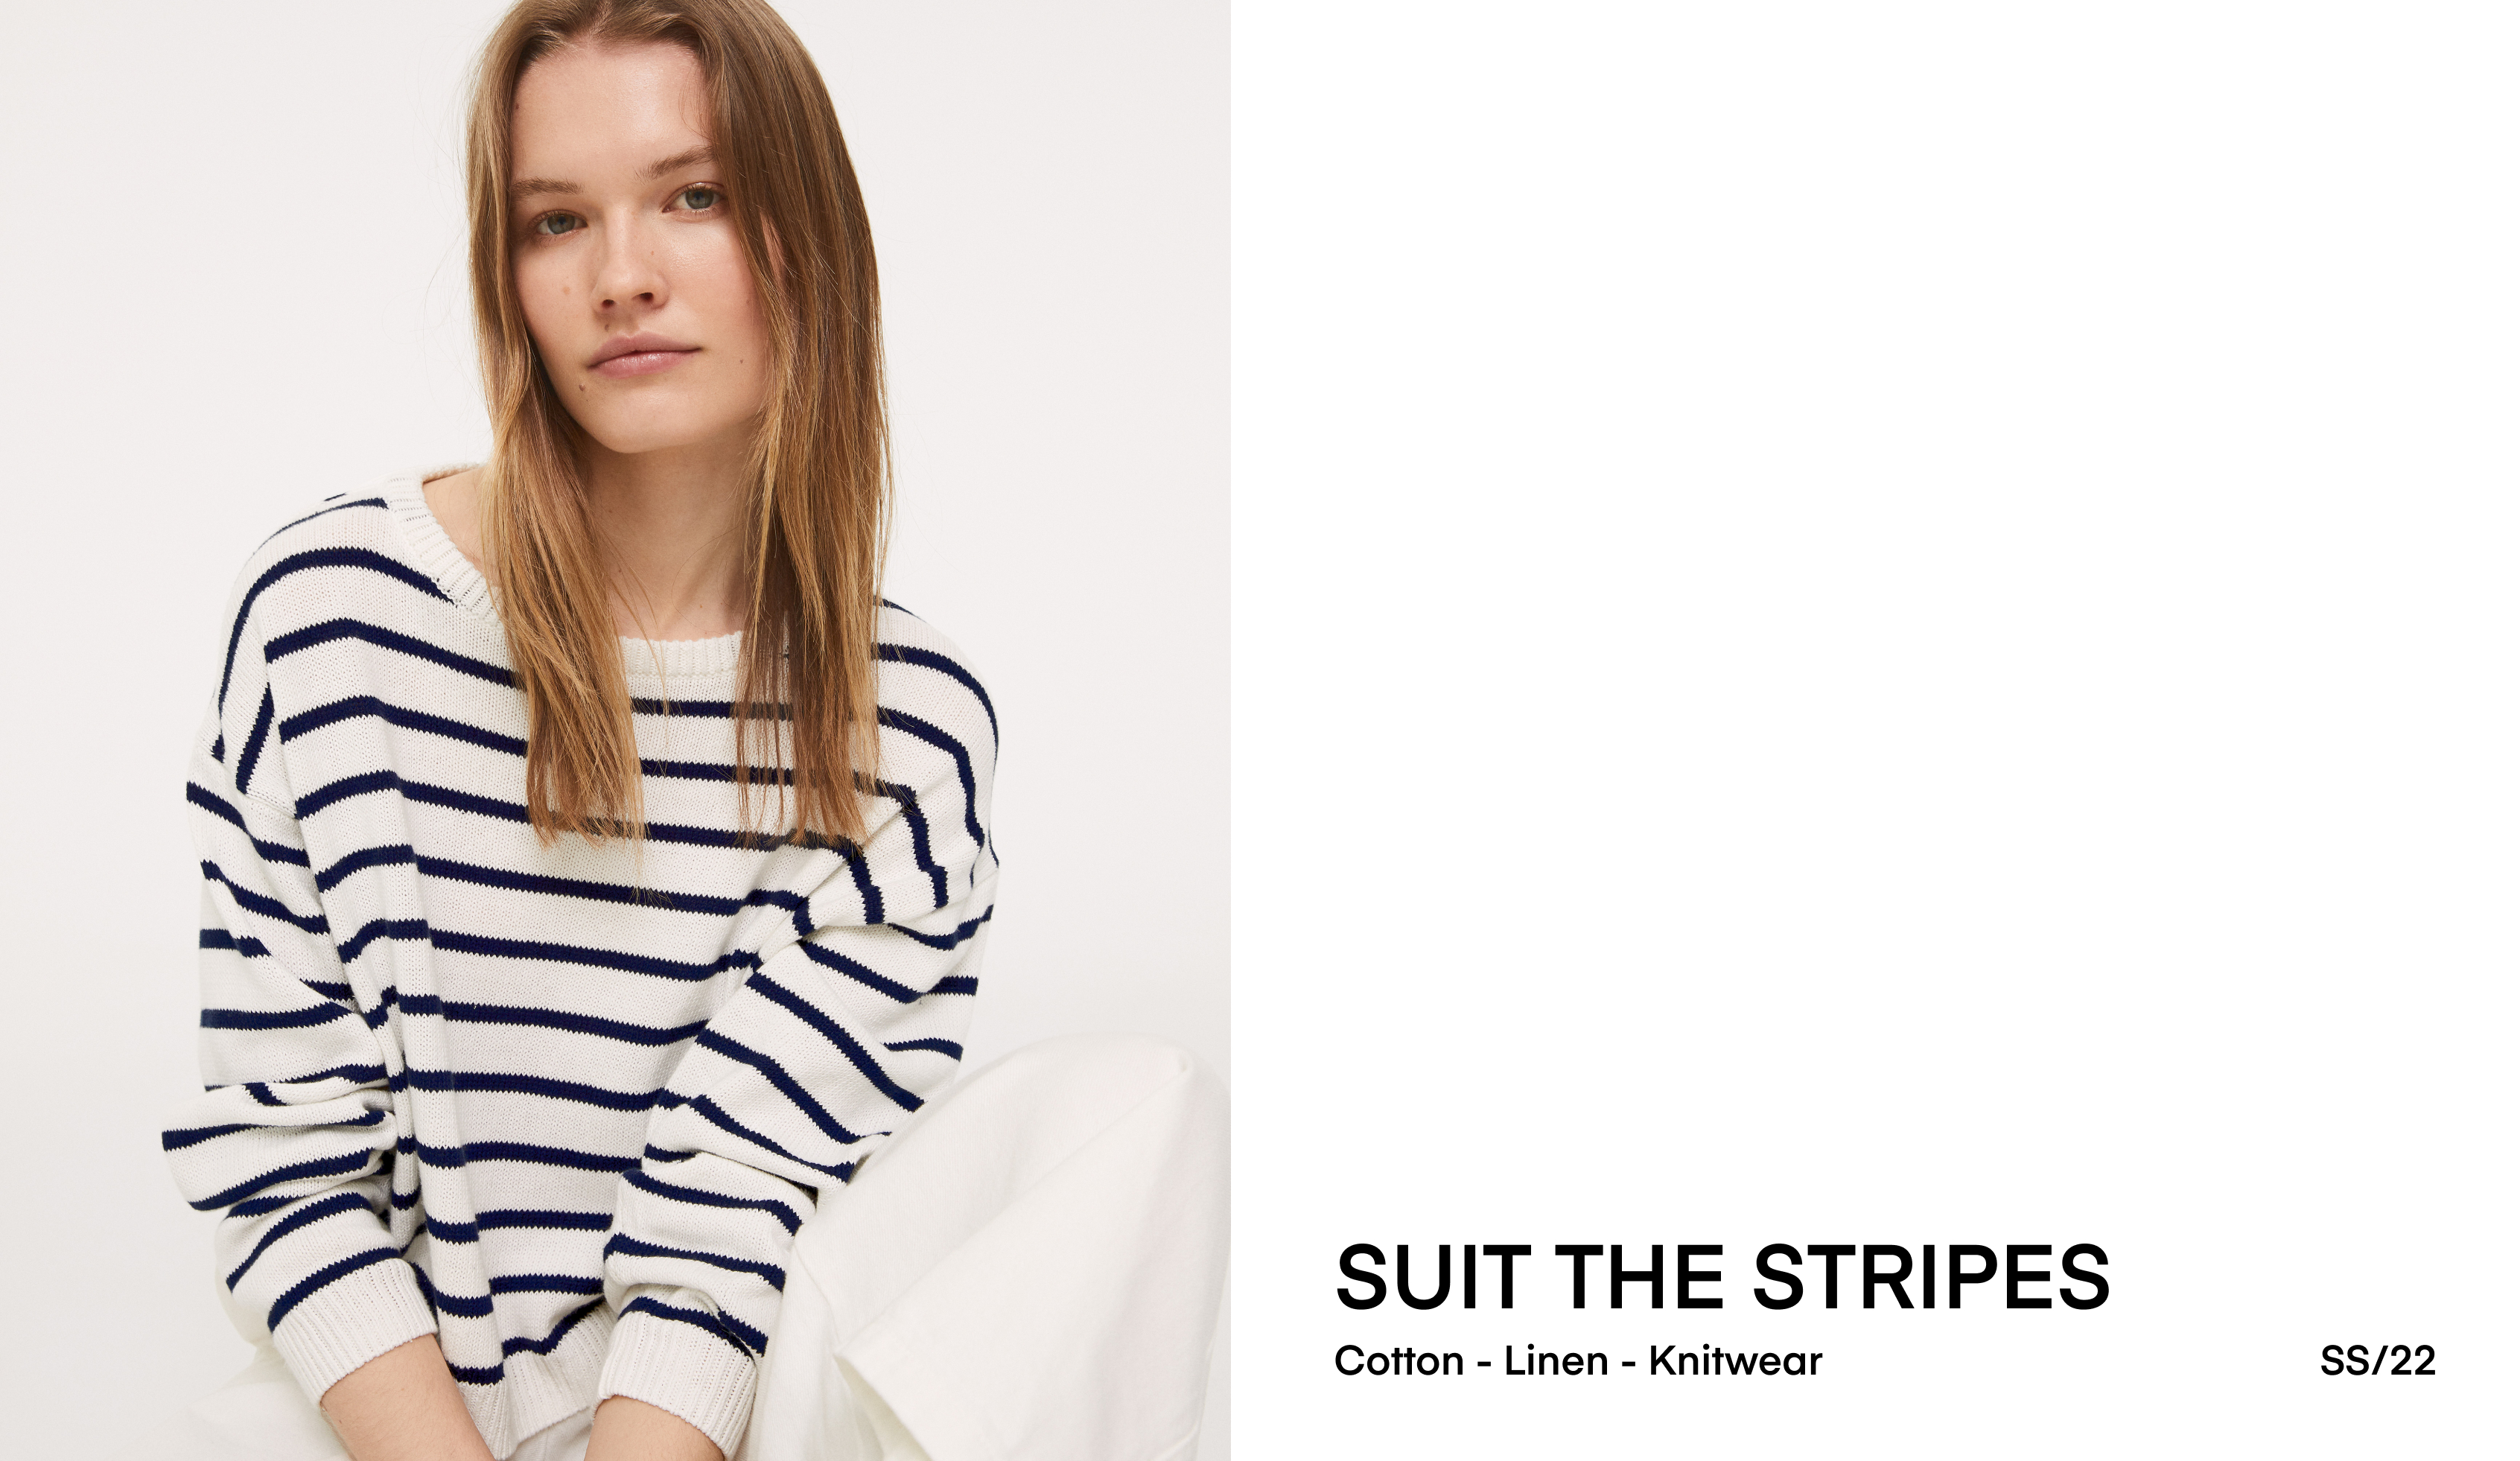 Striped cotton and linen knit jumper